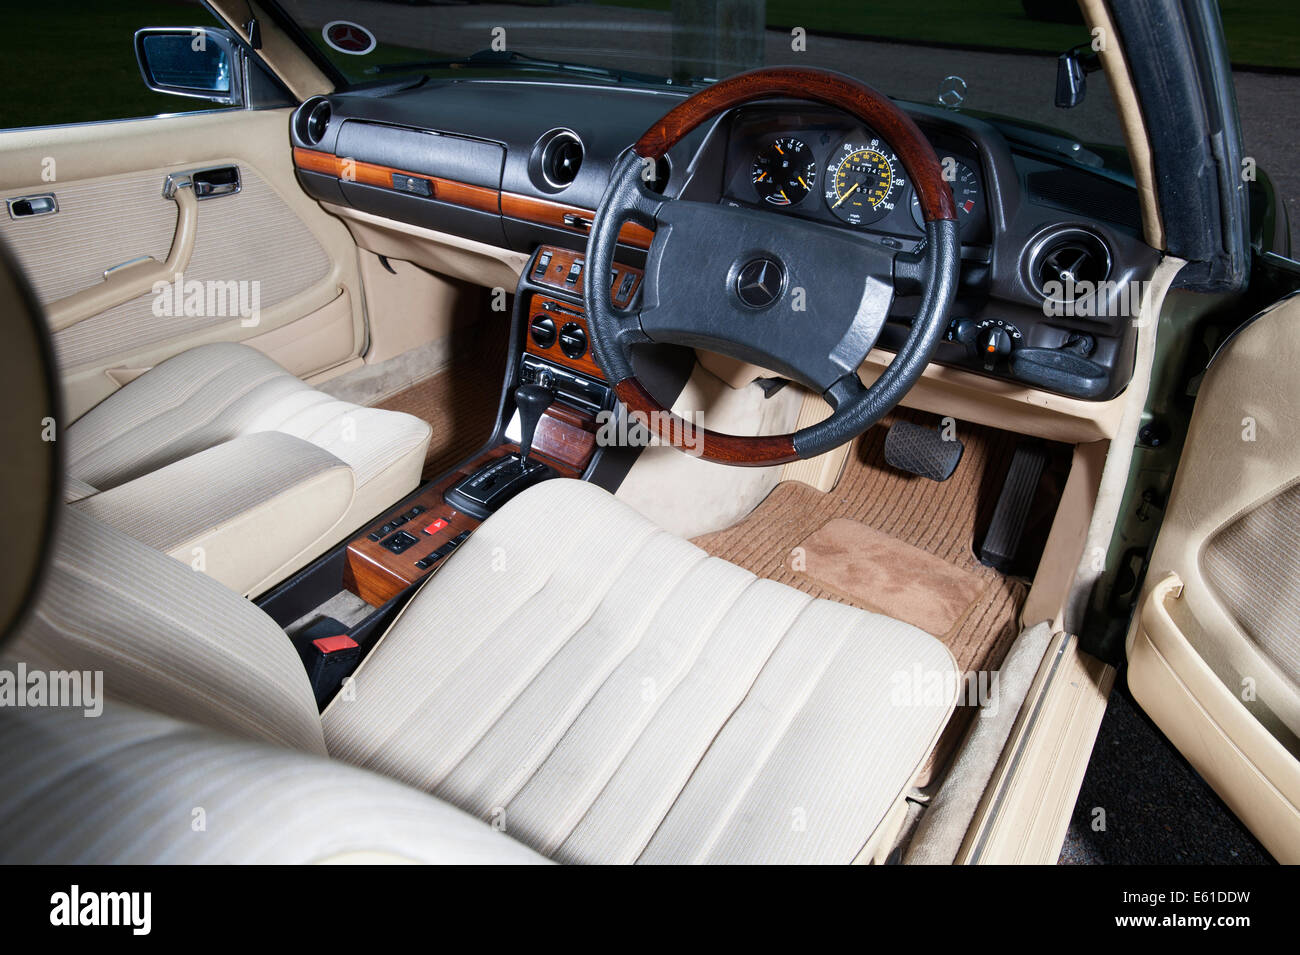 1980 Mercedes 280CE W123 E Class coupe luxury German car driving Stock Photo